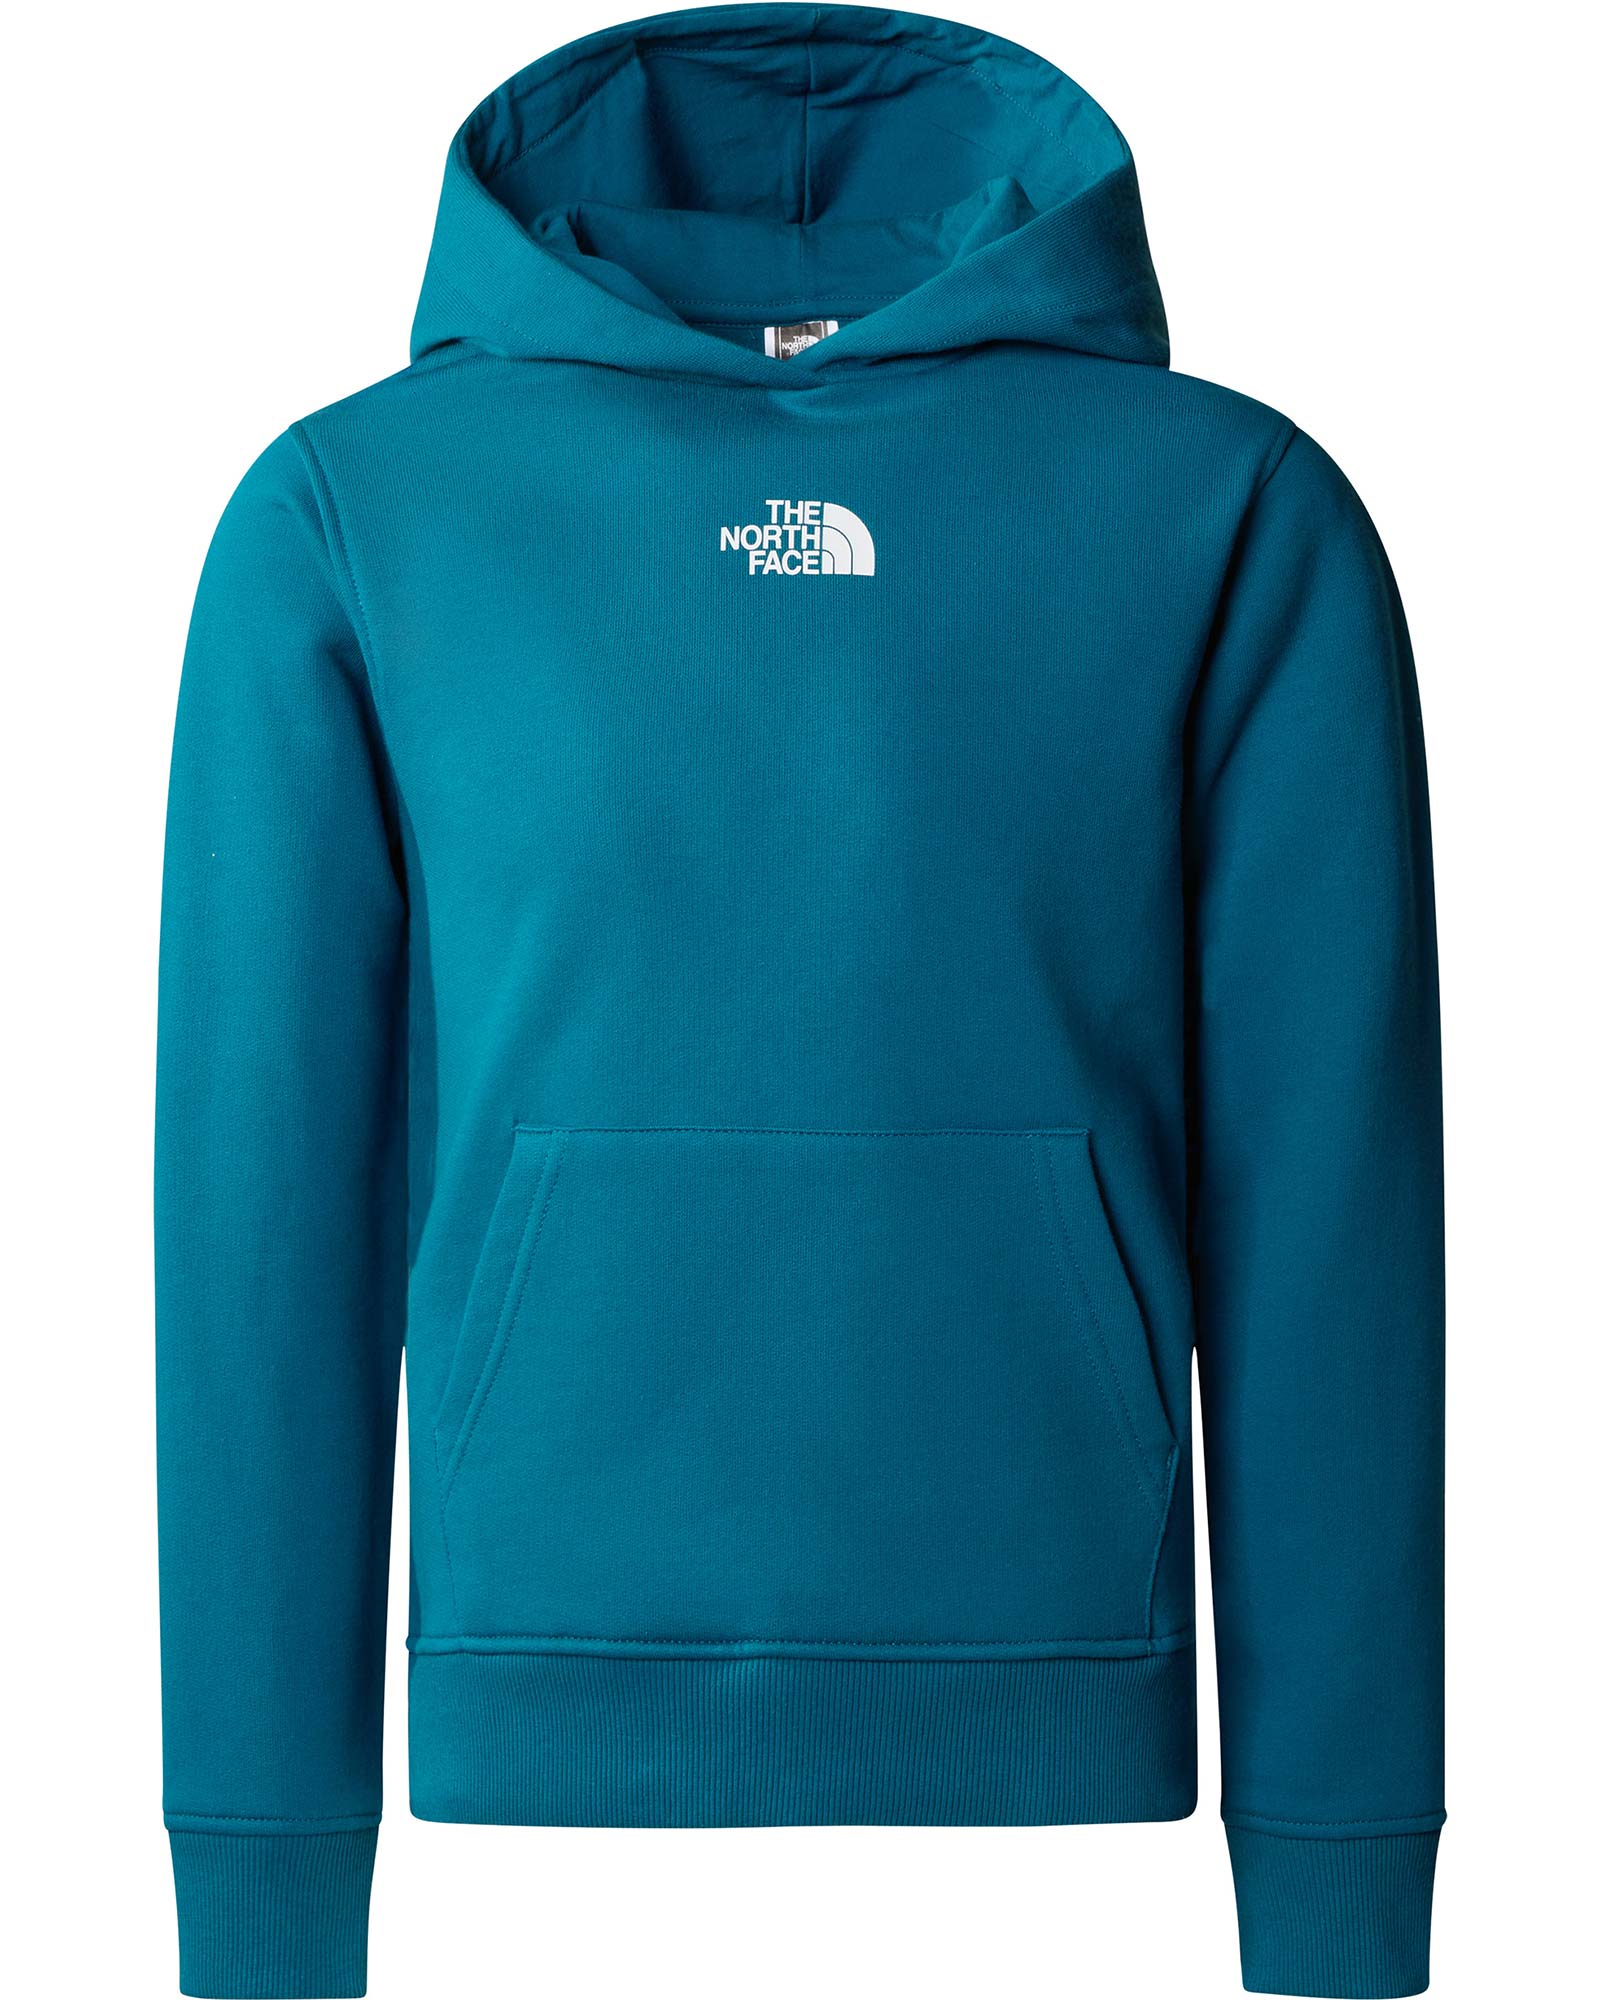 The North Face Youth Po Zumu Hoodie